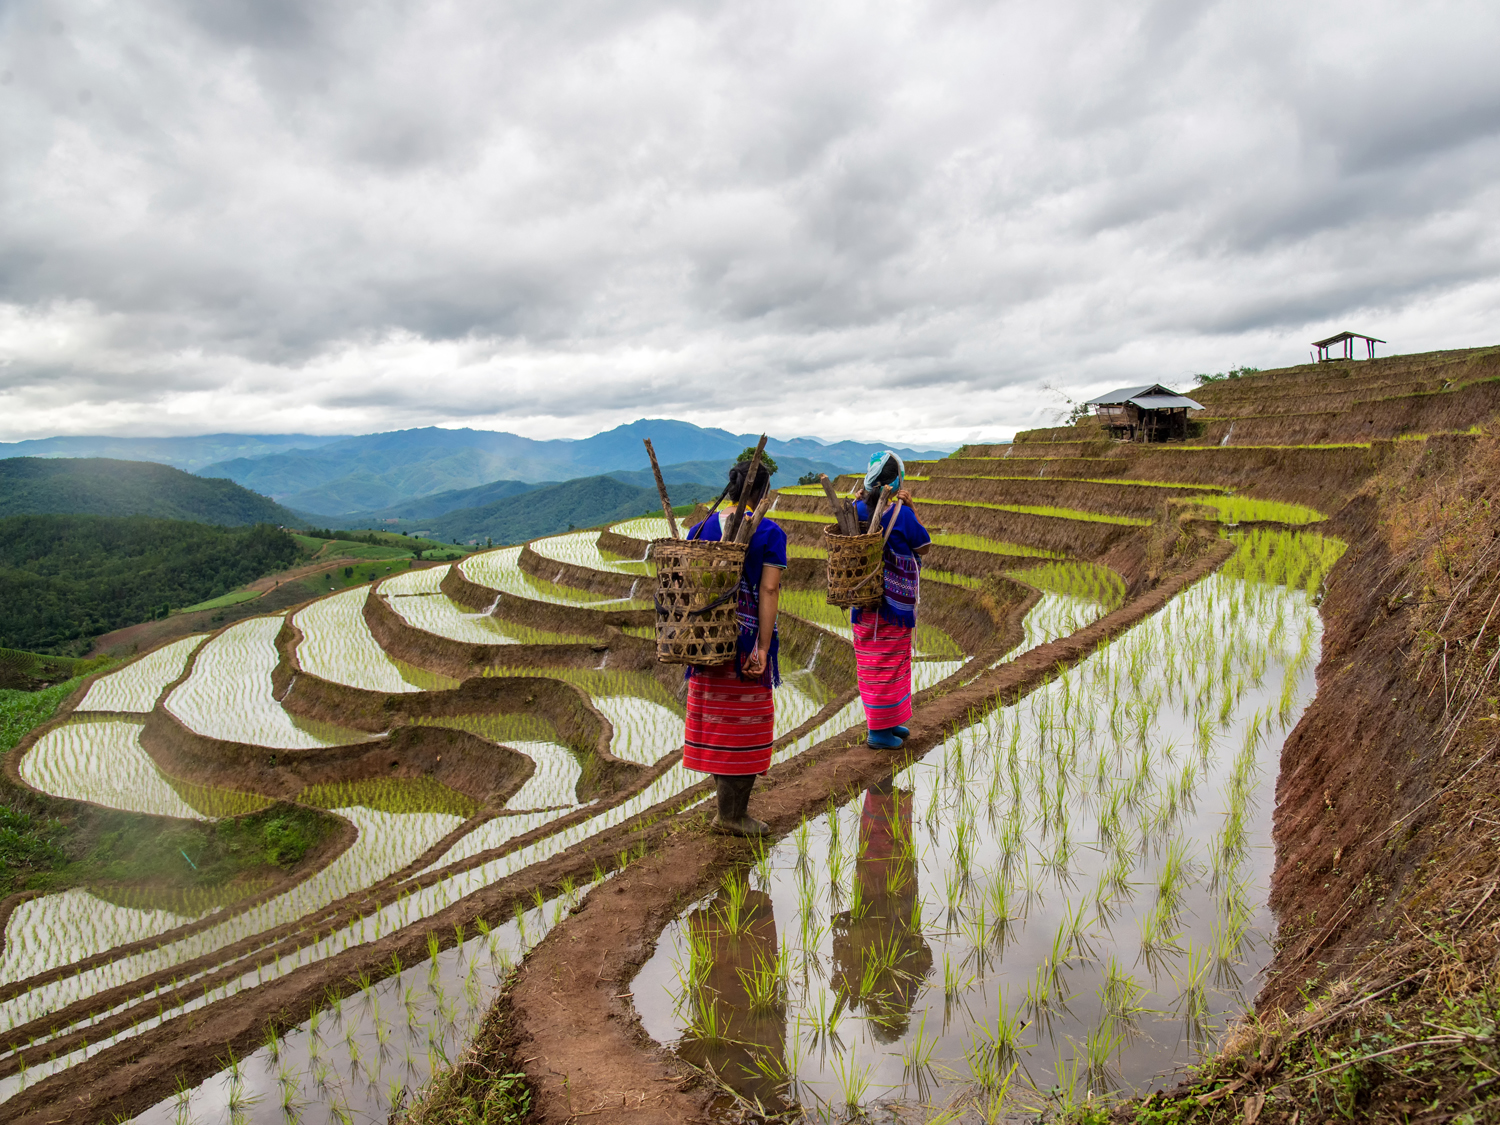 Top 10 Must-See Places in Vietnam - Sapa hill tribes and markets